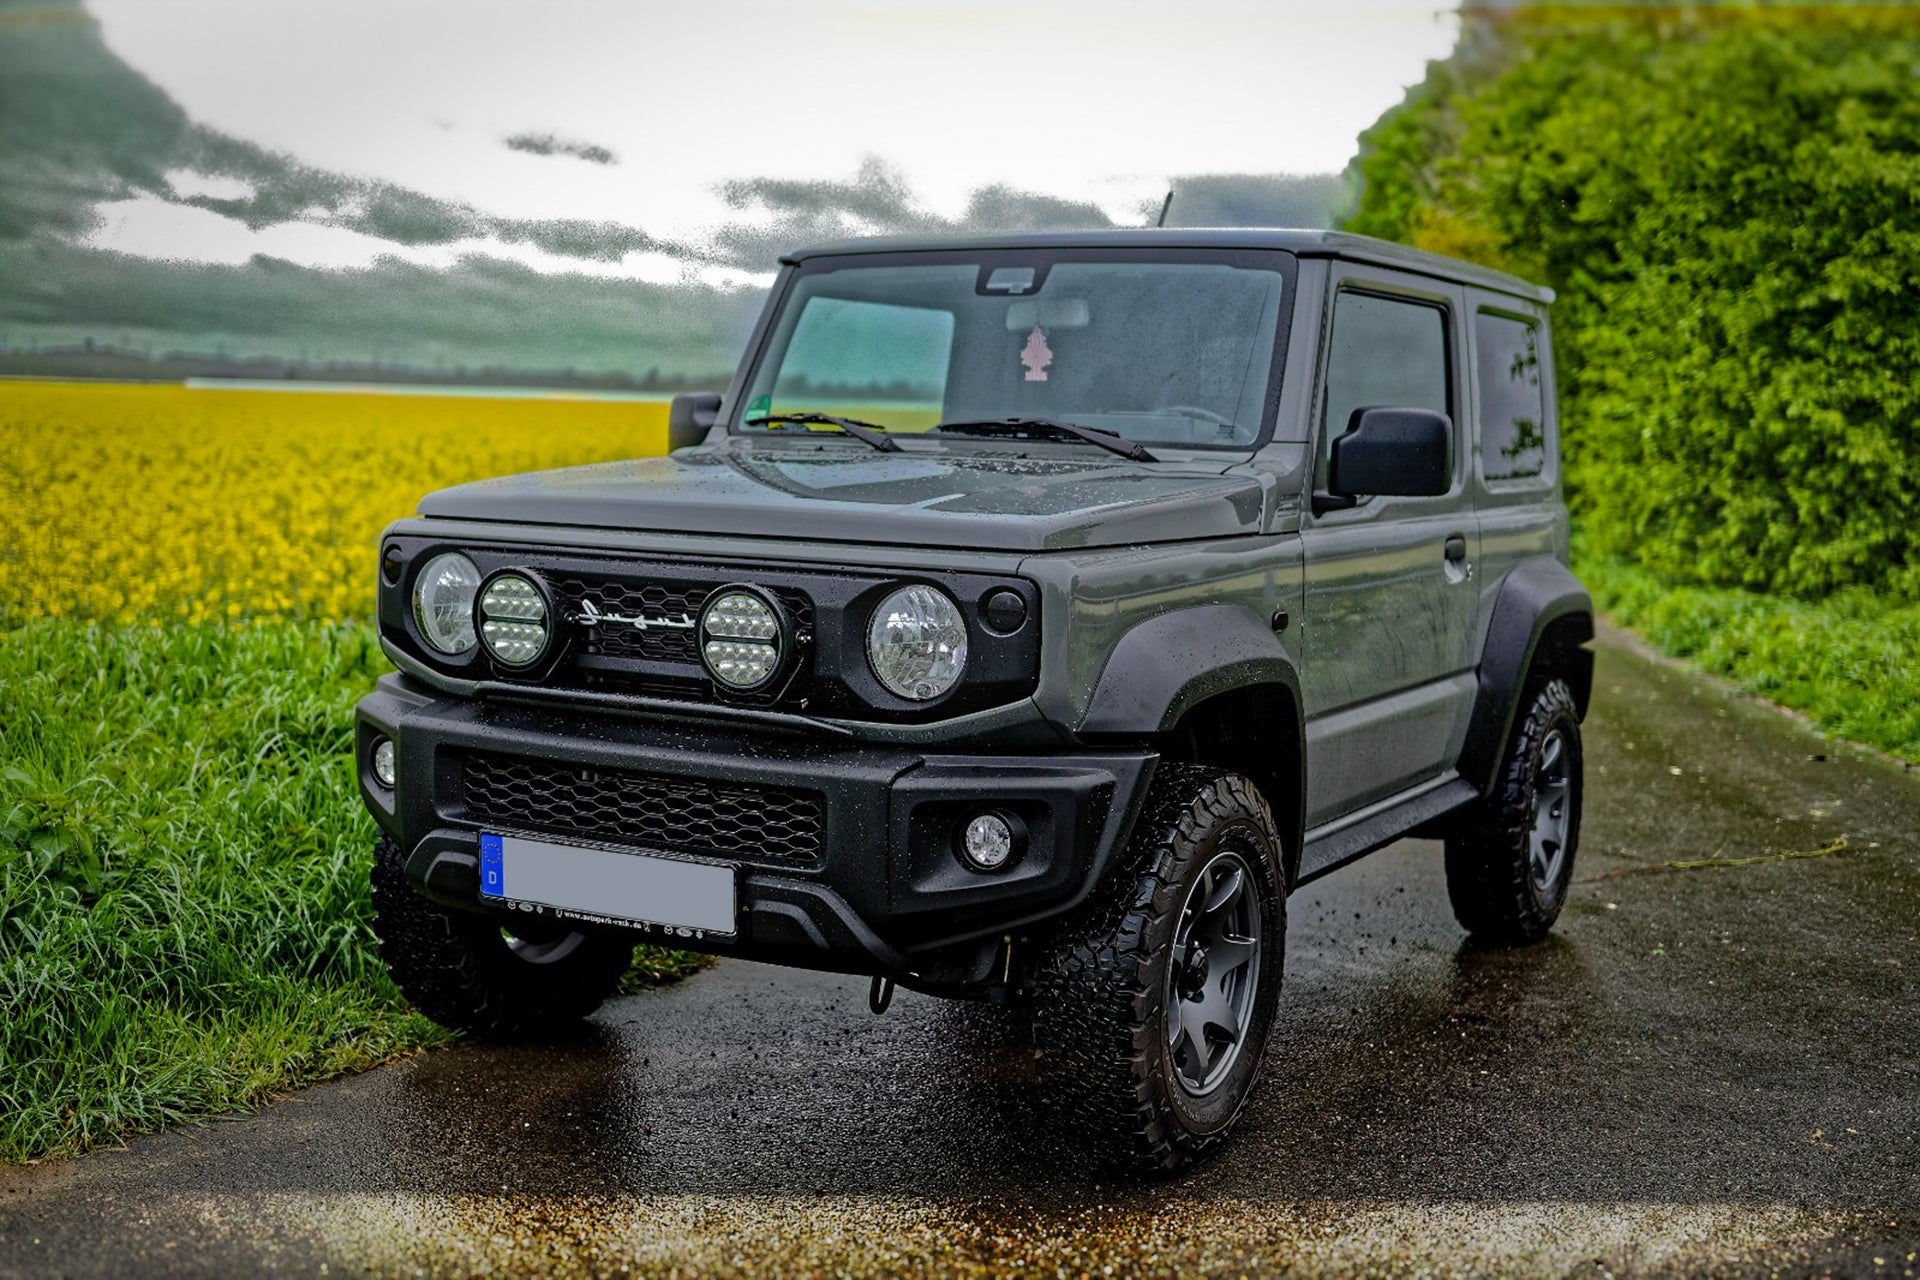 Suzuki Jimny (2018+) with HIGH PEAK J-02 15 inch wheels with a Retro Front Grille and JimnyStyle Smoked LED Lights and other accessories from Street Track Life JimnyStyle